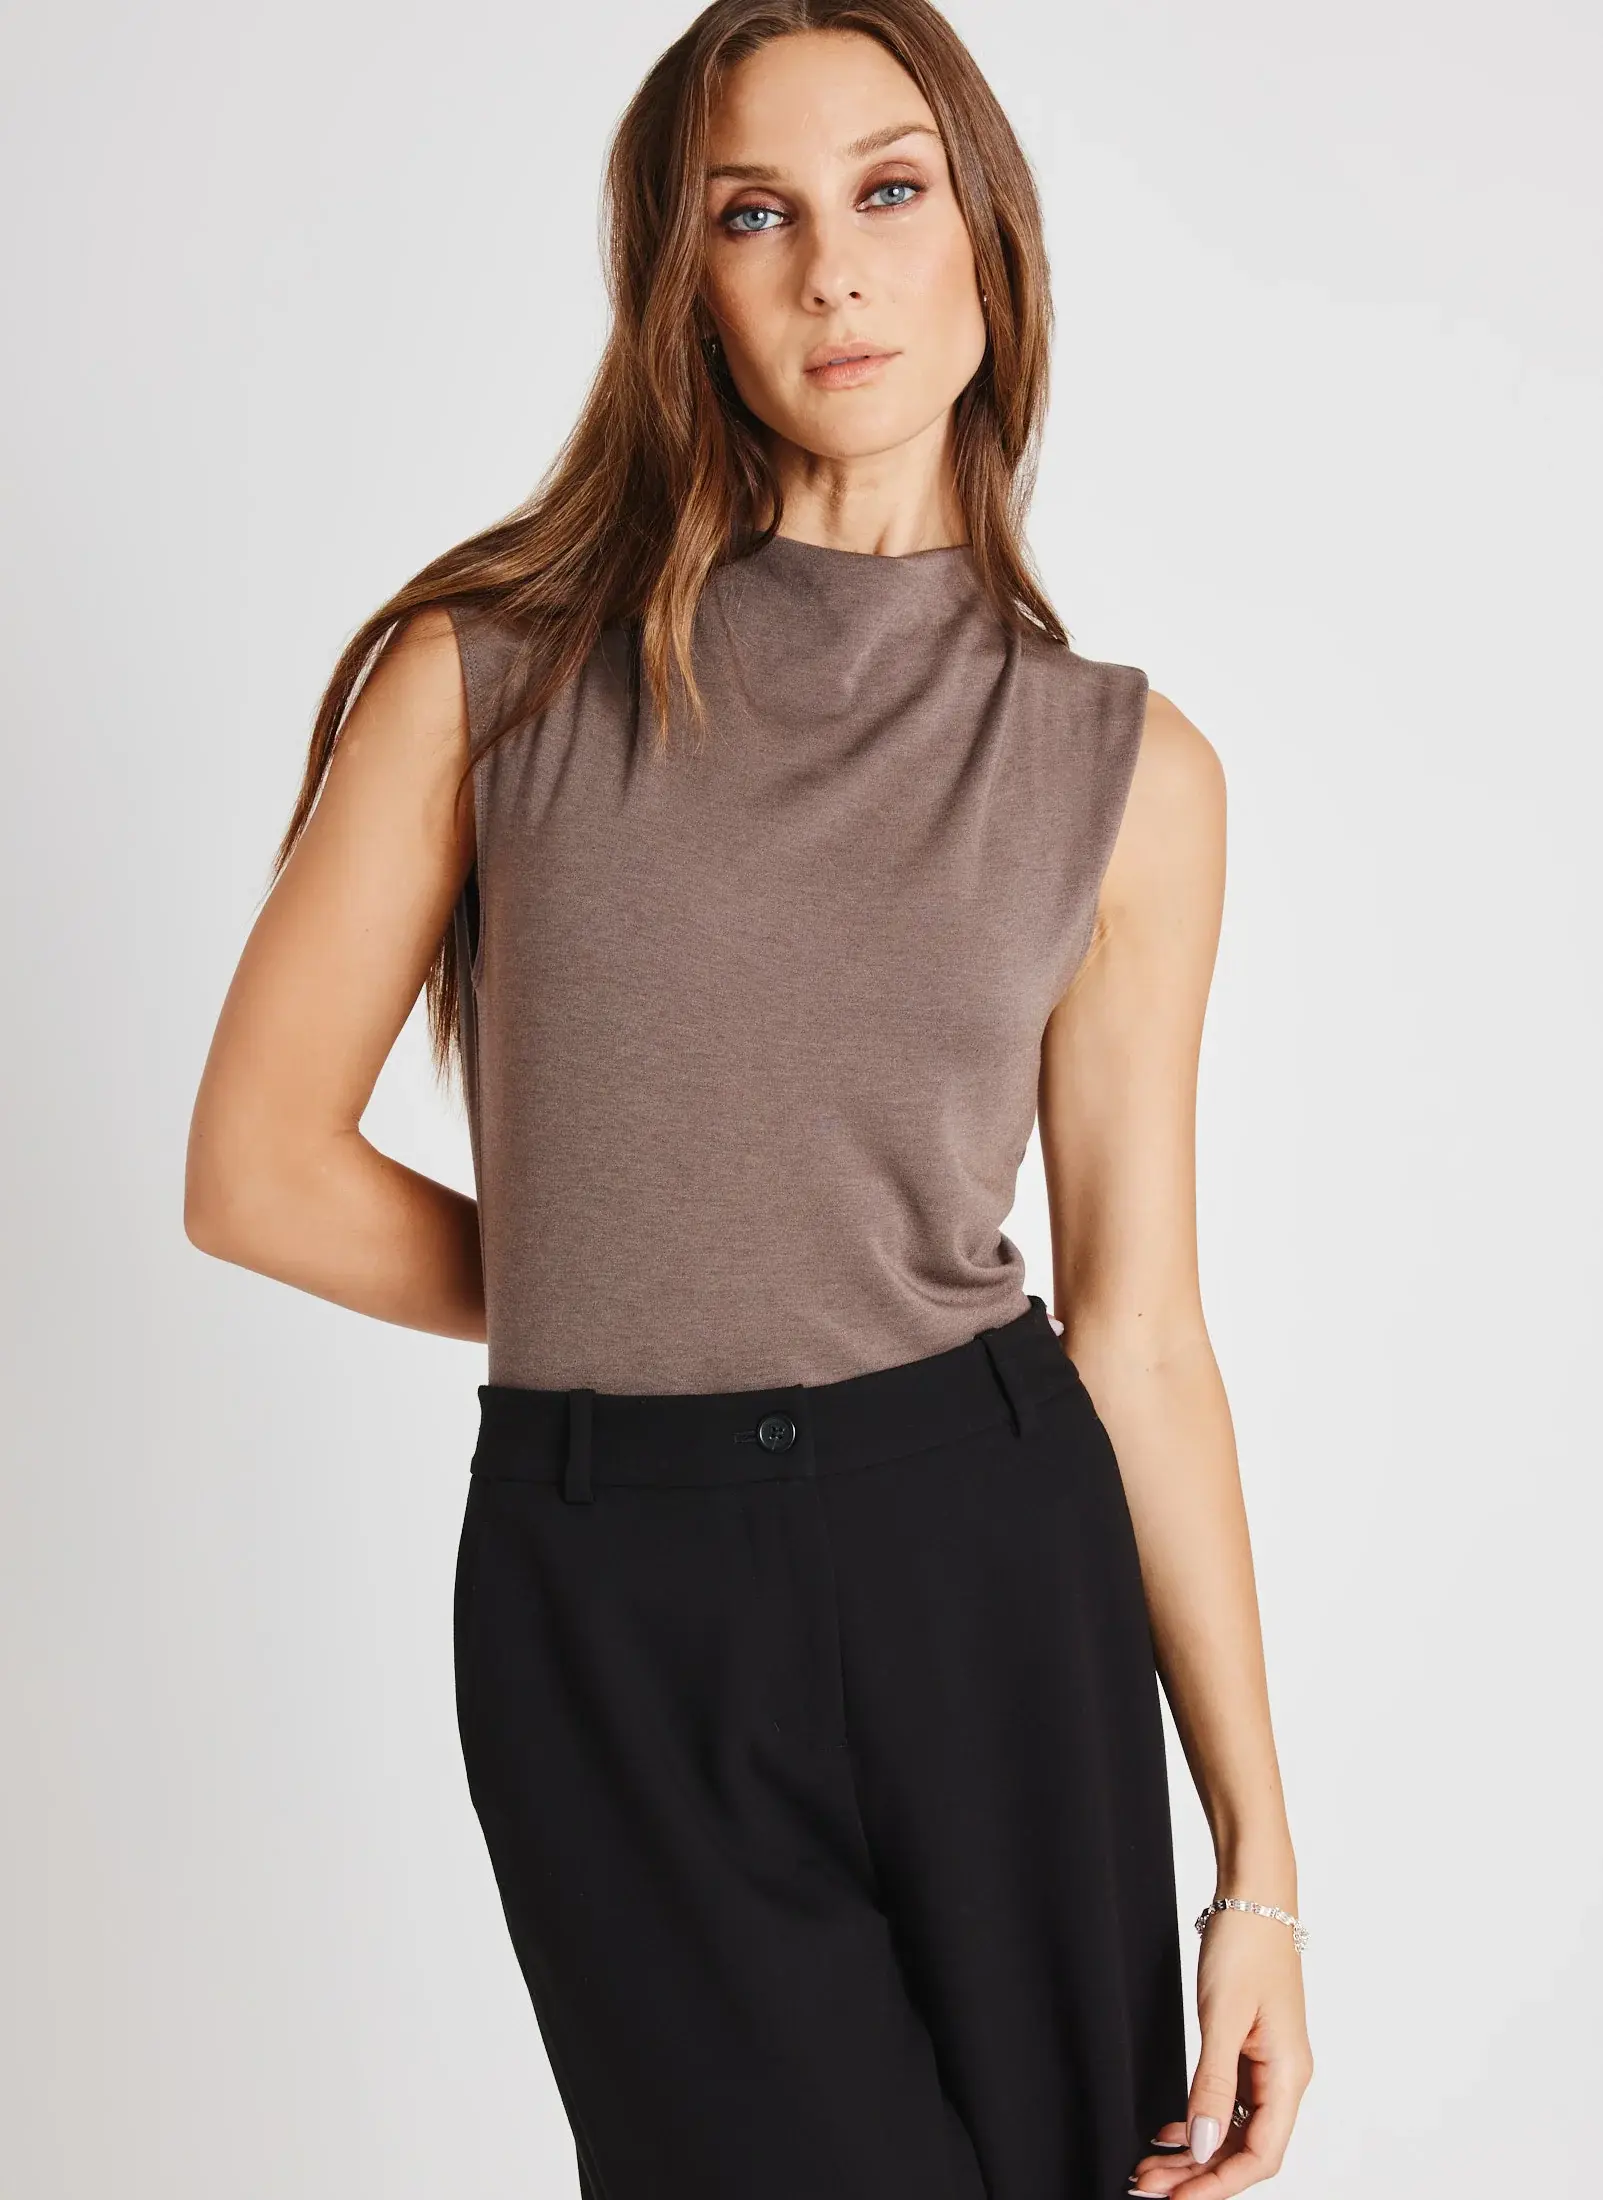 Kit And Ace Belmont Brushed Sleeveless Top. 1